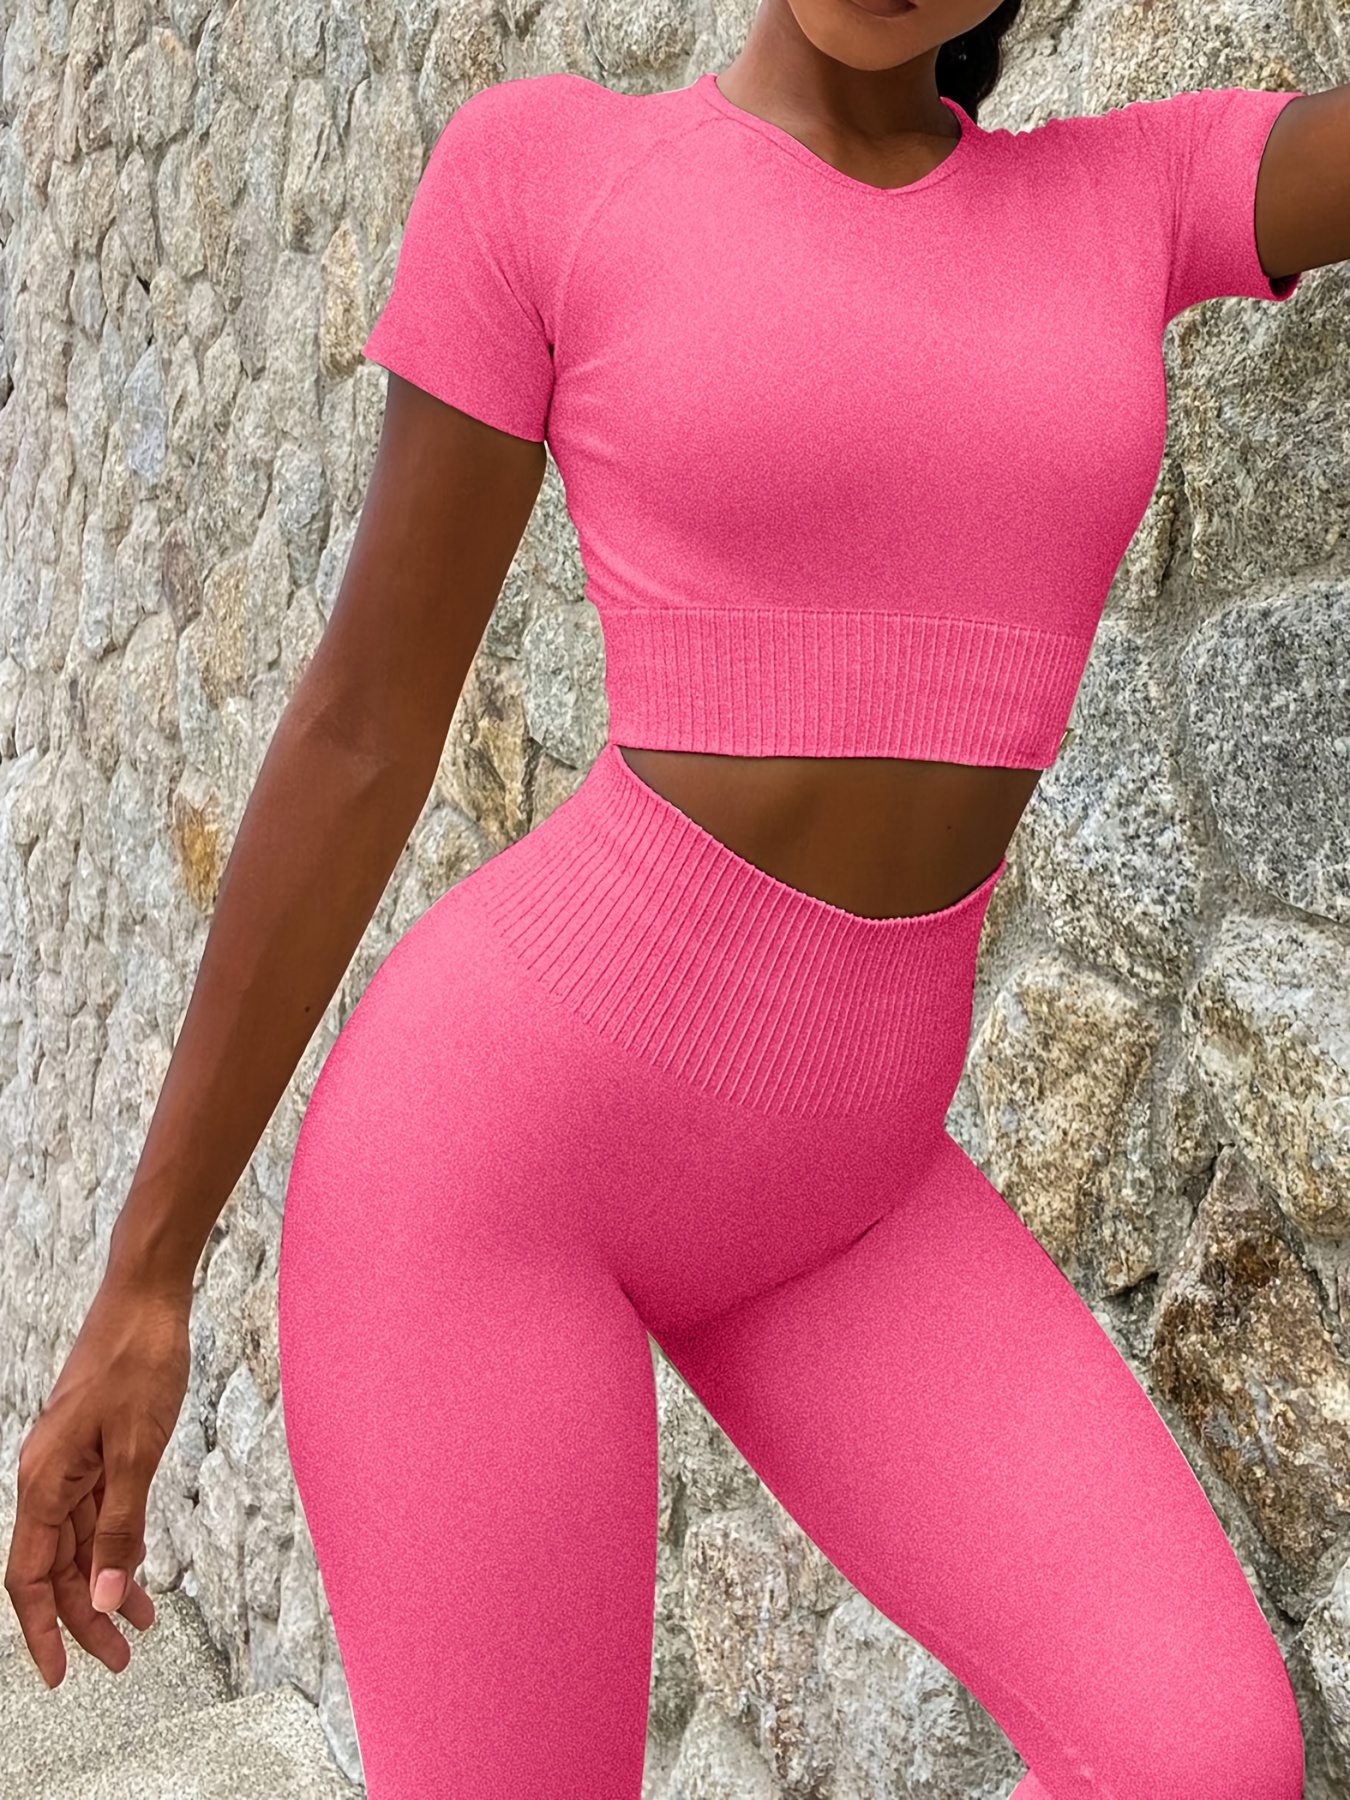  OYS Womens Yoga 2 Pieces Workout Outfits Seamless High Waist  leggings Sports Crop Top Running Sets Rose : Clothing, Shoes & Jewelry